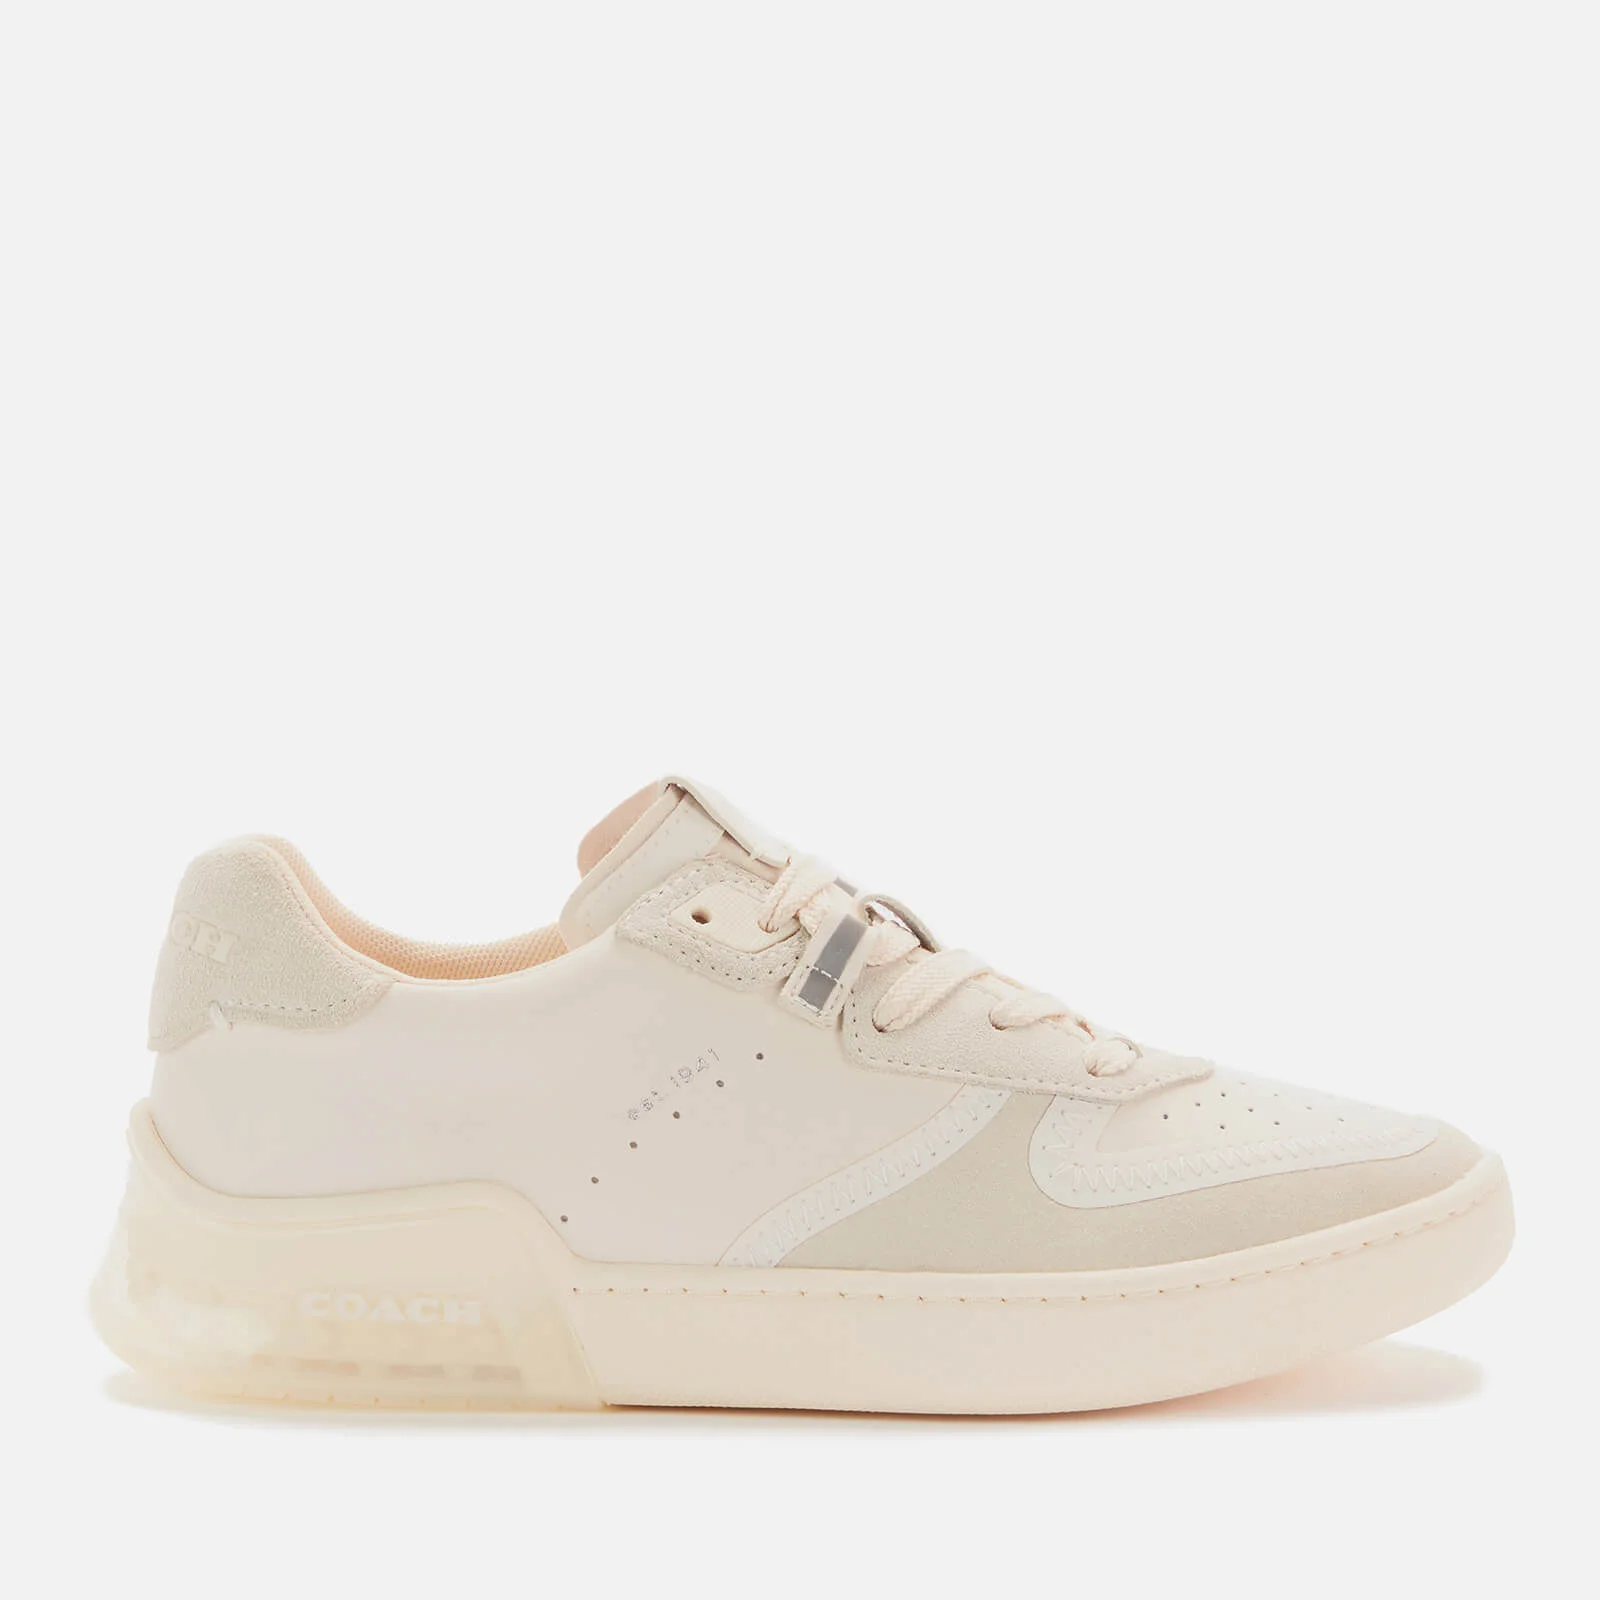 Coach Women's Citysole Suede/Leather Court Trainers - Chalk Image 1